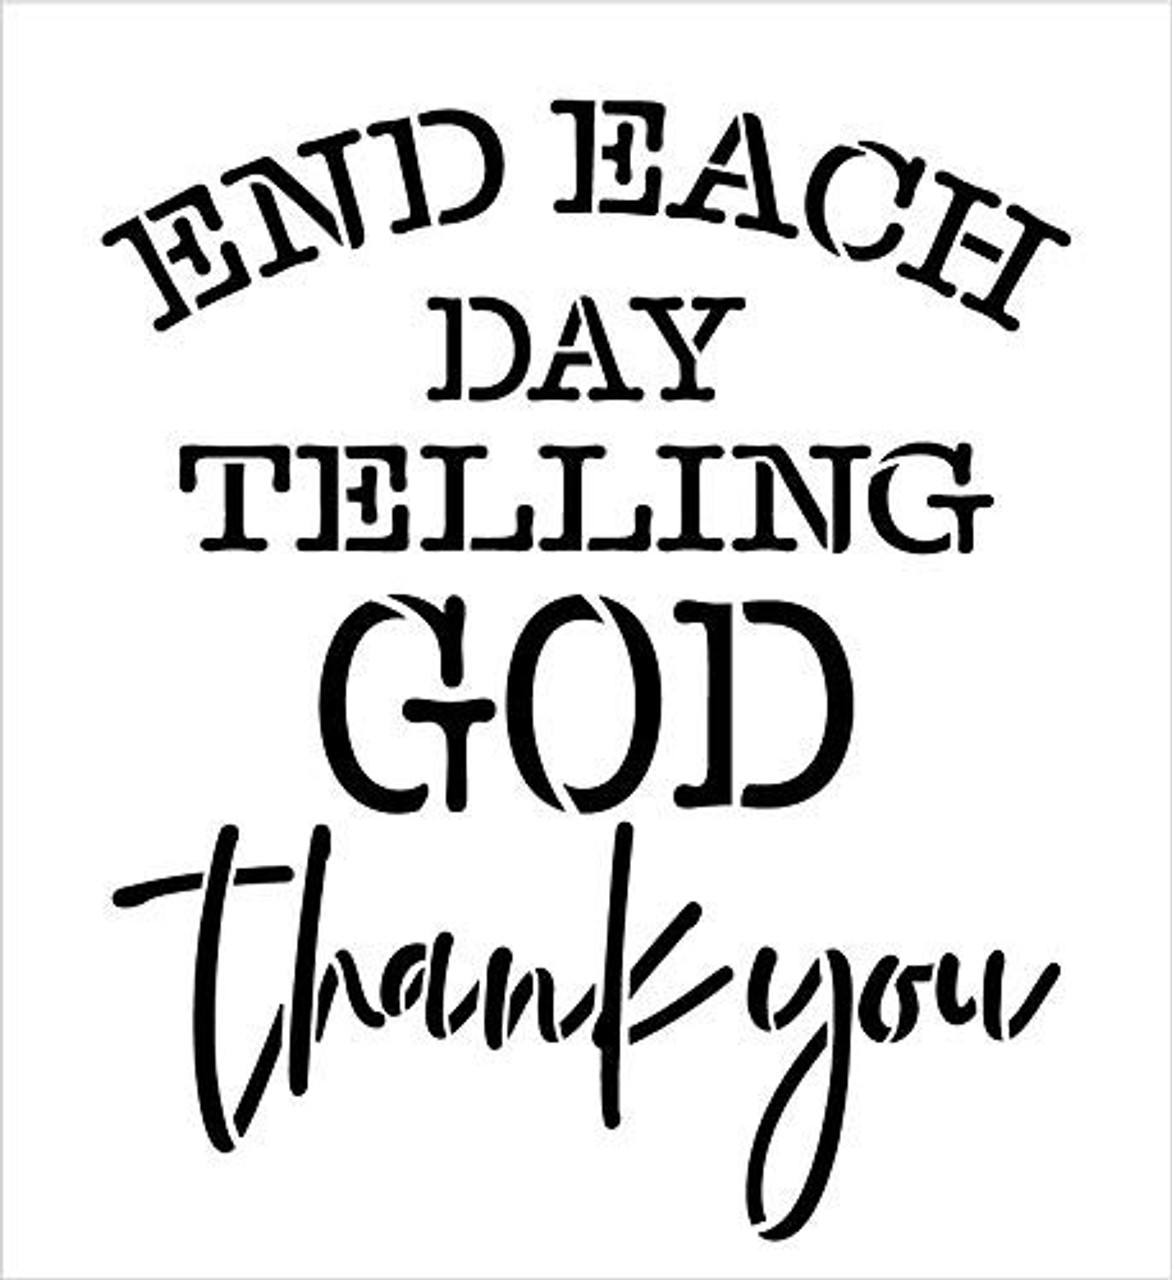 End Each Day Telling God Thank You Stencil by StudioR12 | Paint Wood Sign | Reusable Mylar Template | Craft Simple Rustic Christian Home Decor | DIY Inspiration Faith Truths | Select Size (21" x 22")